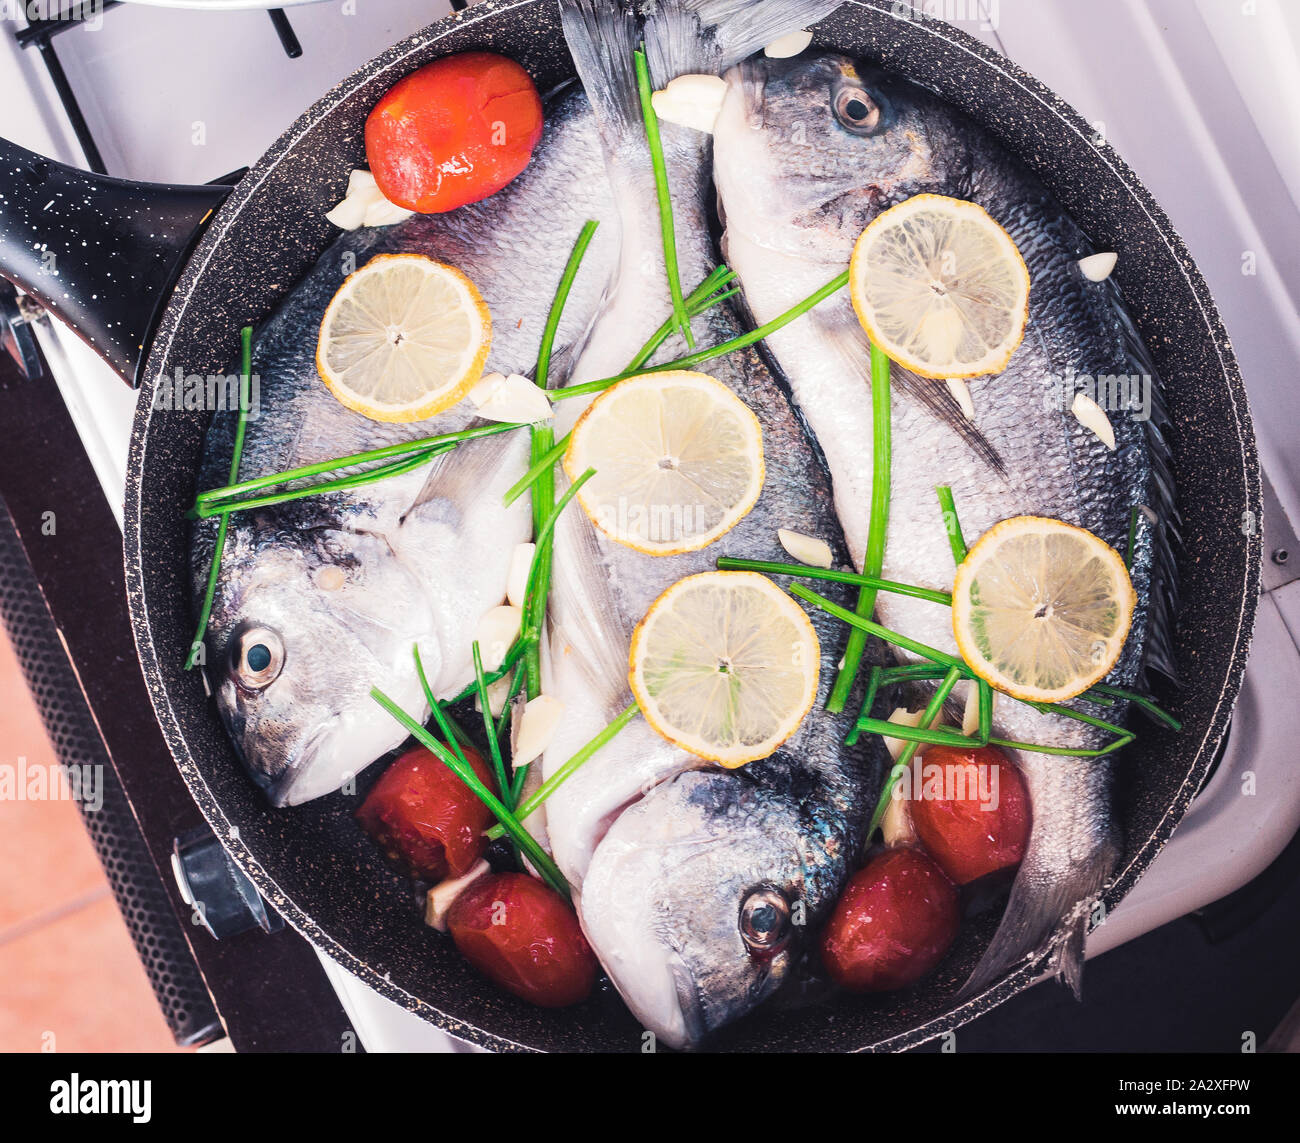 Raw orata fish on frying pan cooking with lemon, tomatoes and greenery. Top view Stock Photo